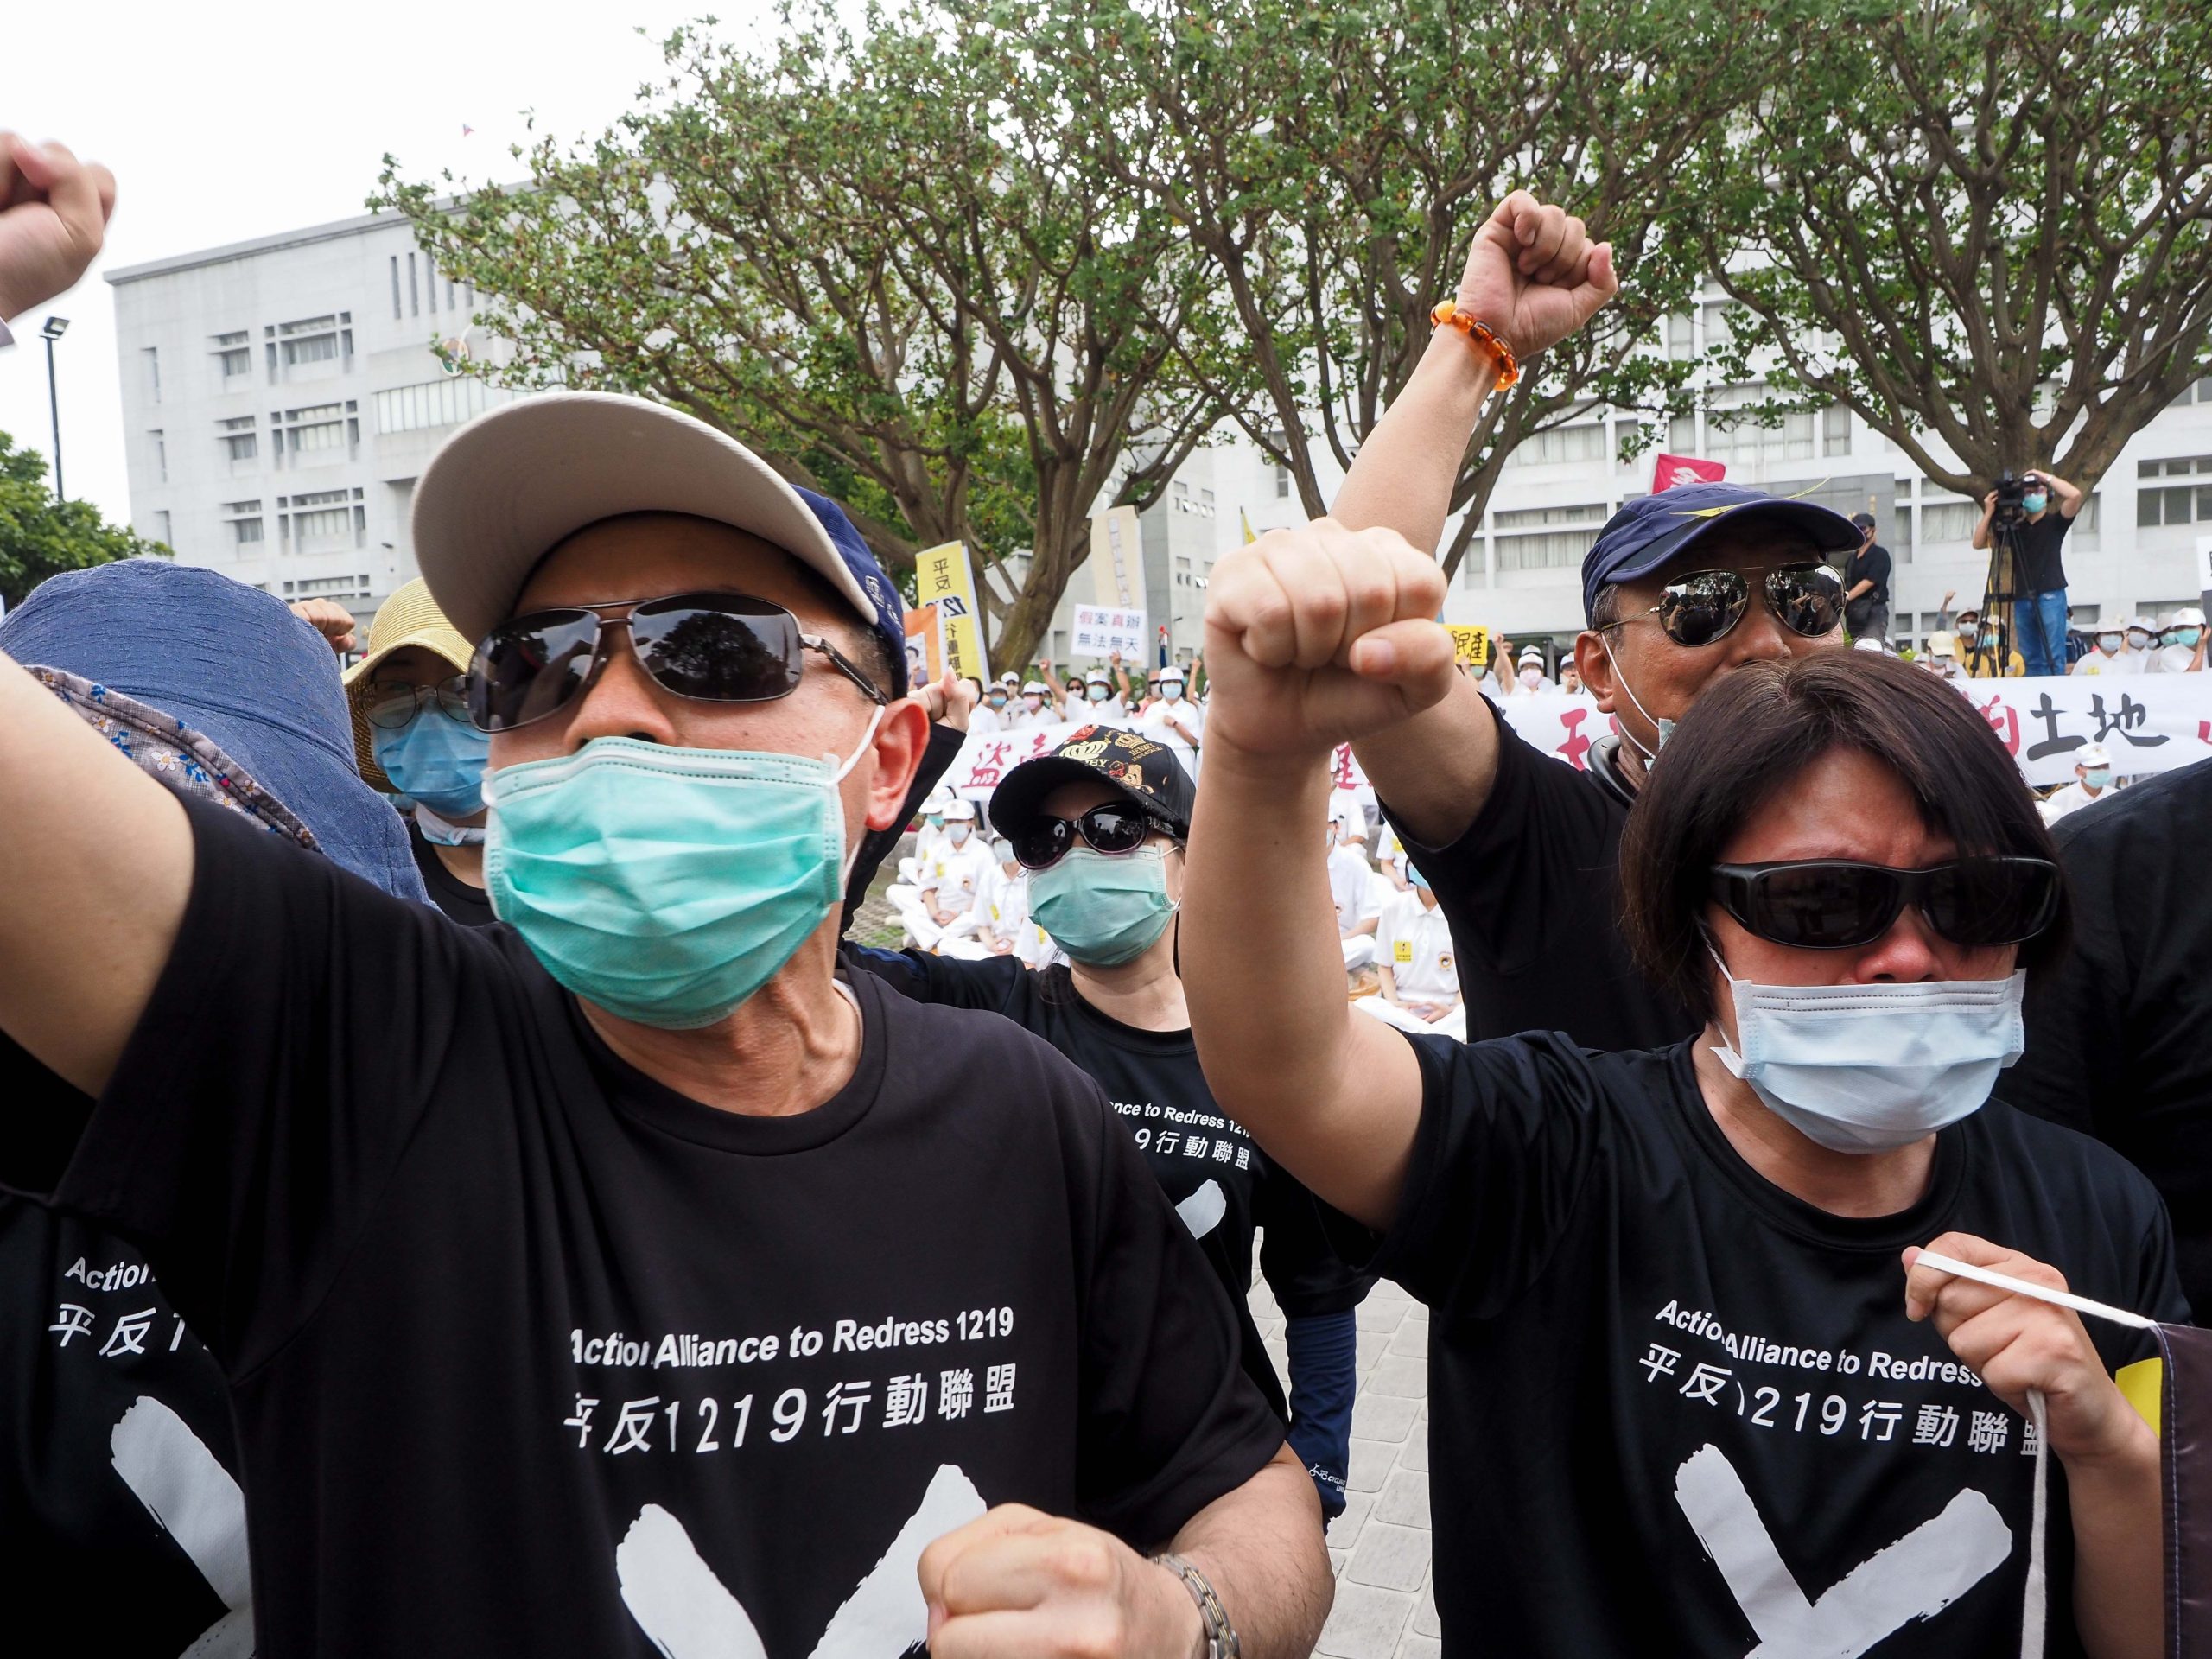 Protesters express their outrage over the Taiwan government’s human rights abuses